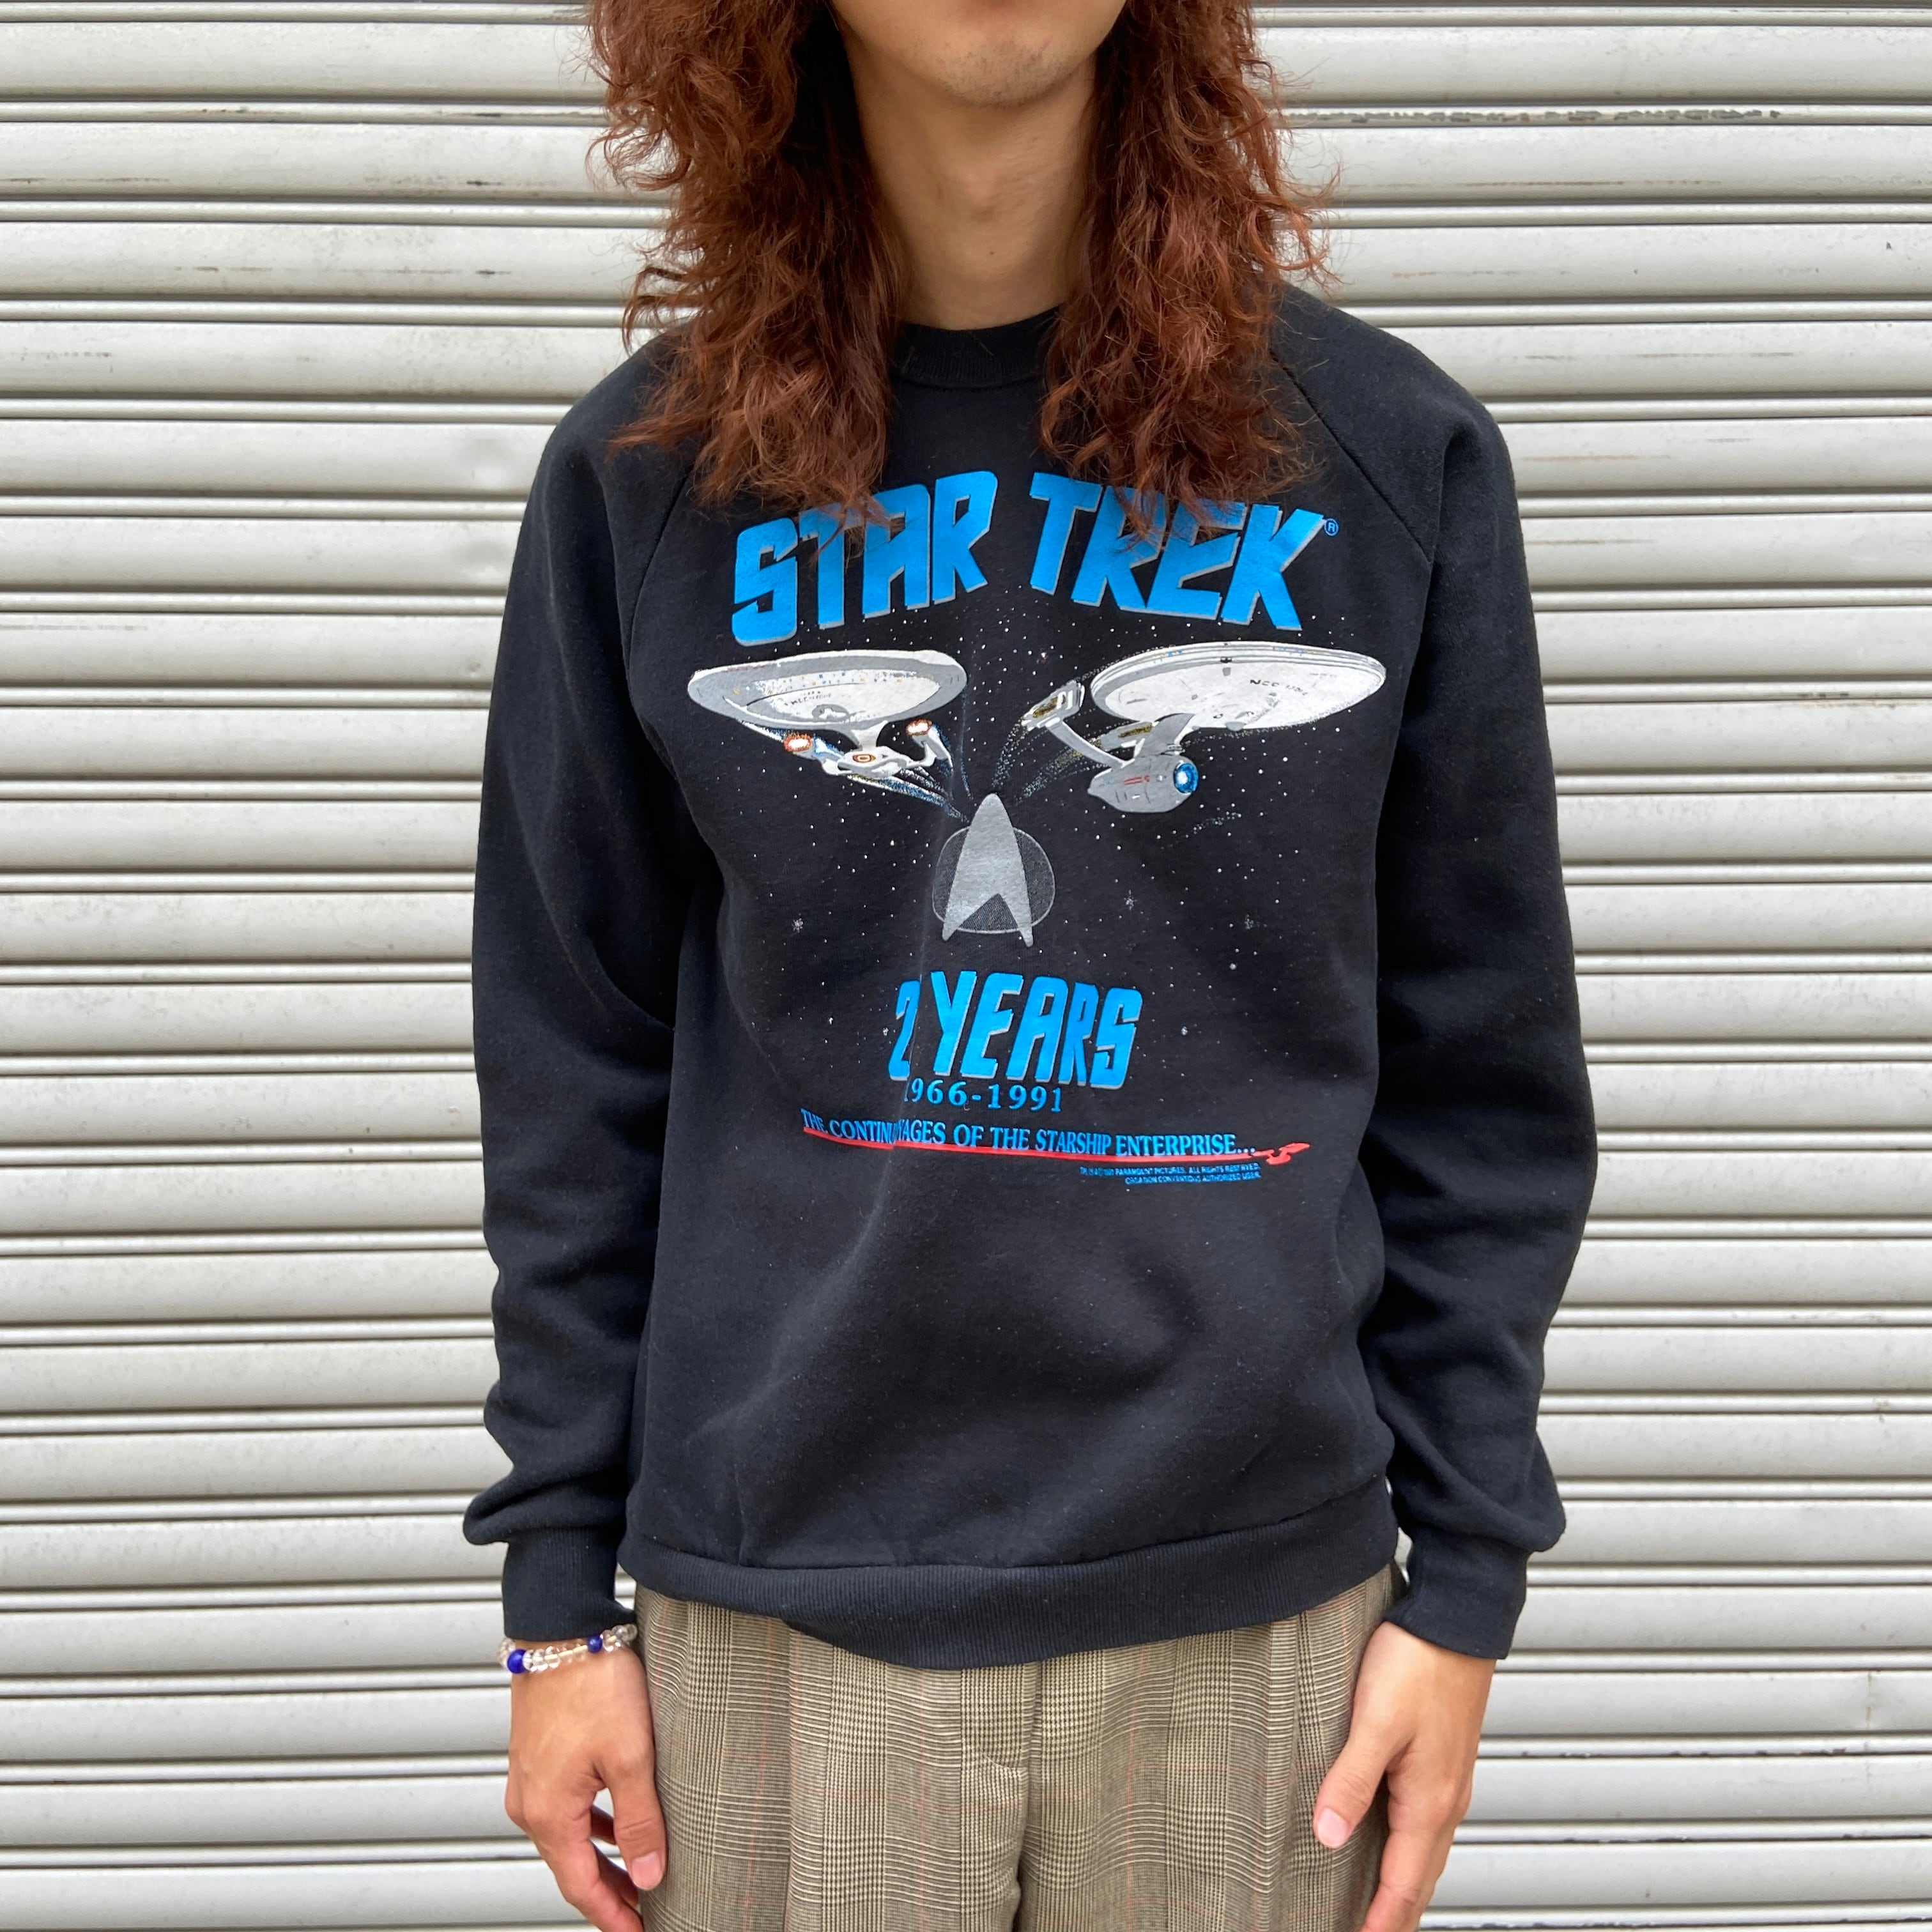 hectic 「real」スプレーロゴスウェット 黒L 90s